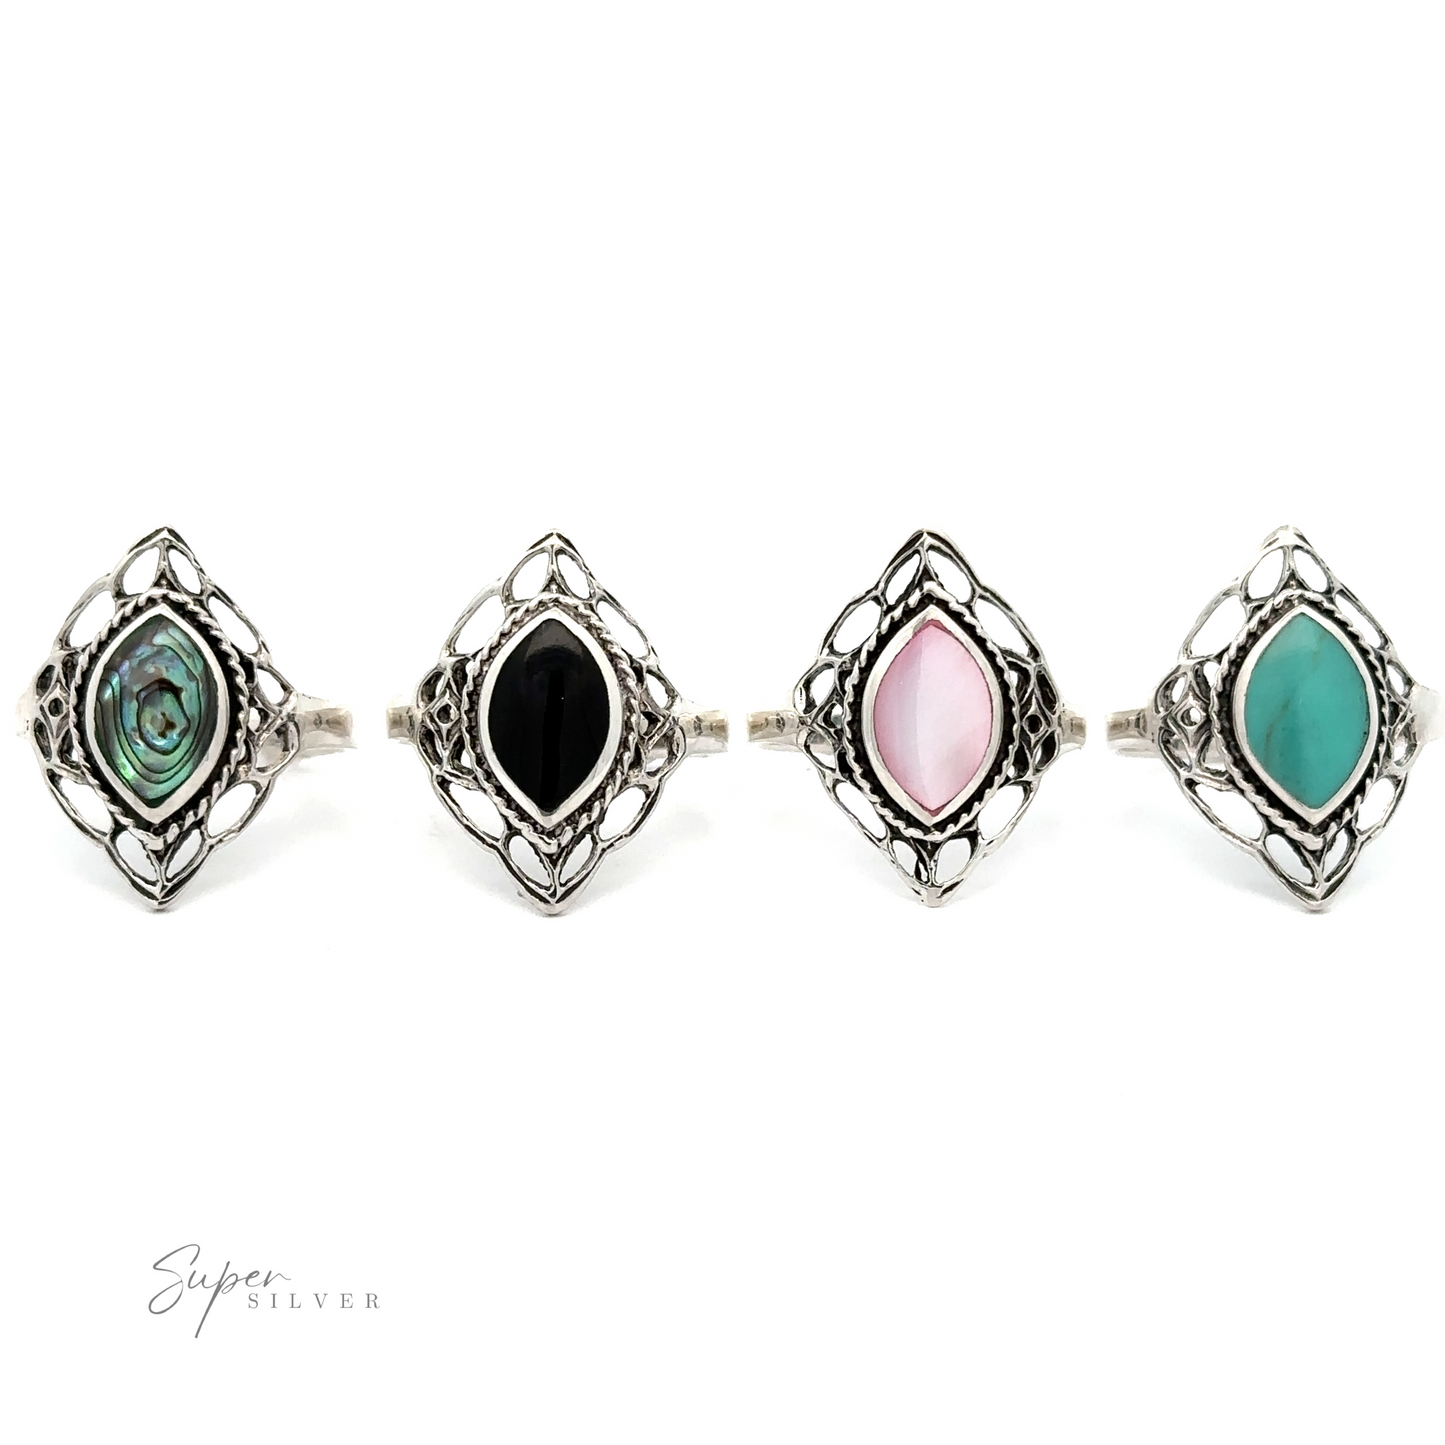 A row of Delicate Marquise Shield Rings inlaid with different colors of gemstones.